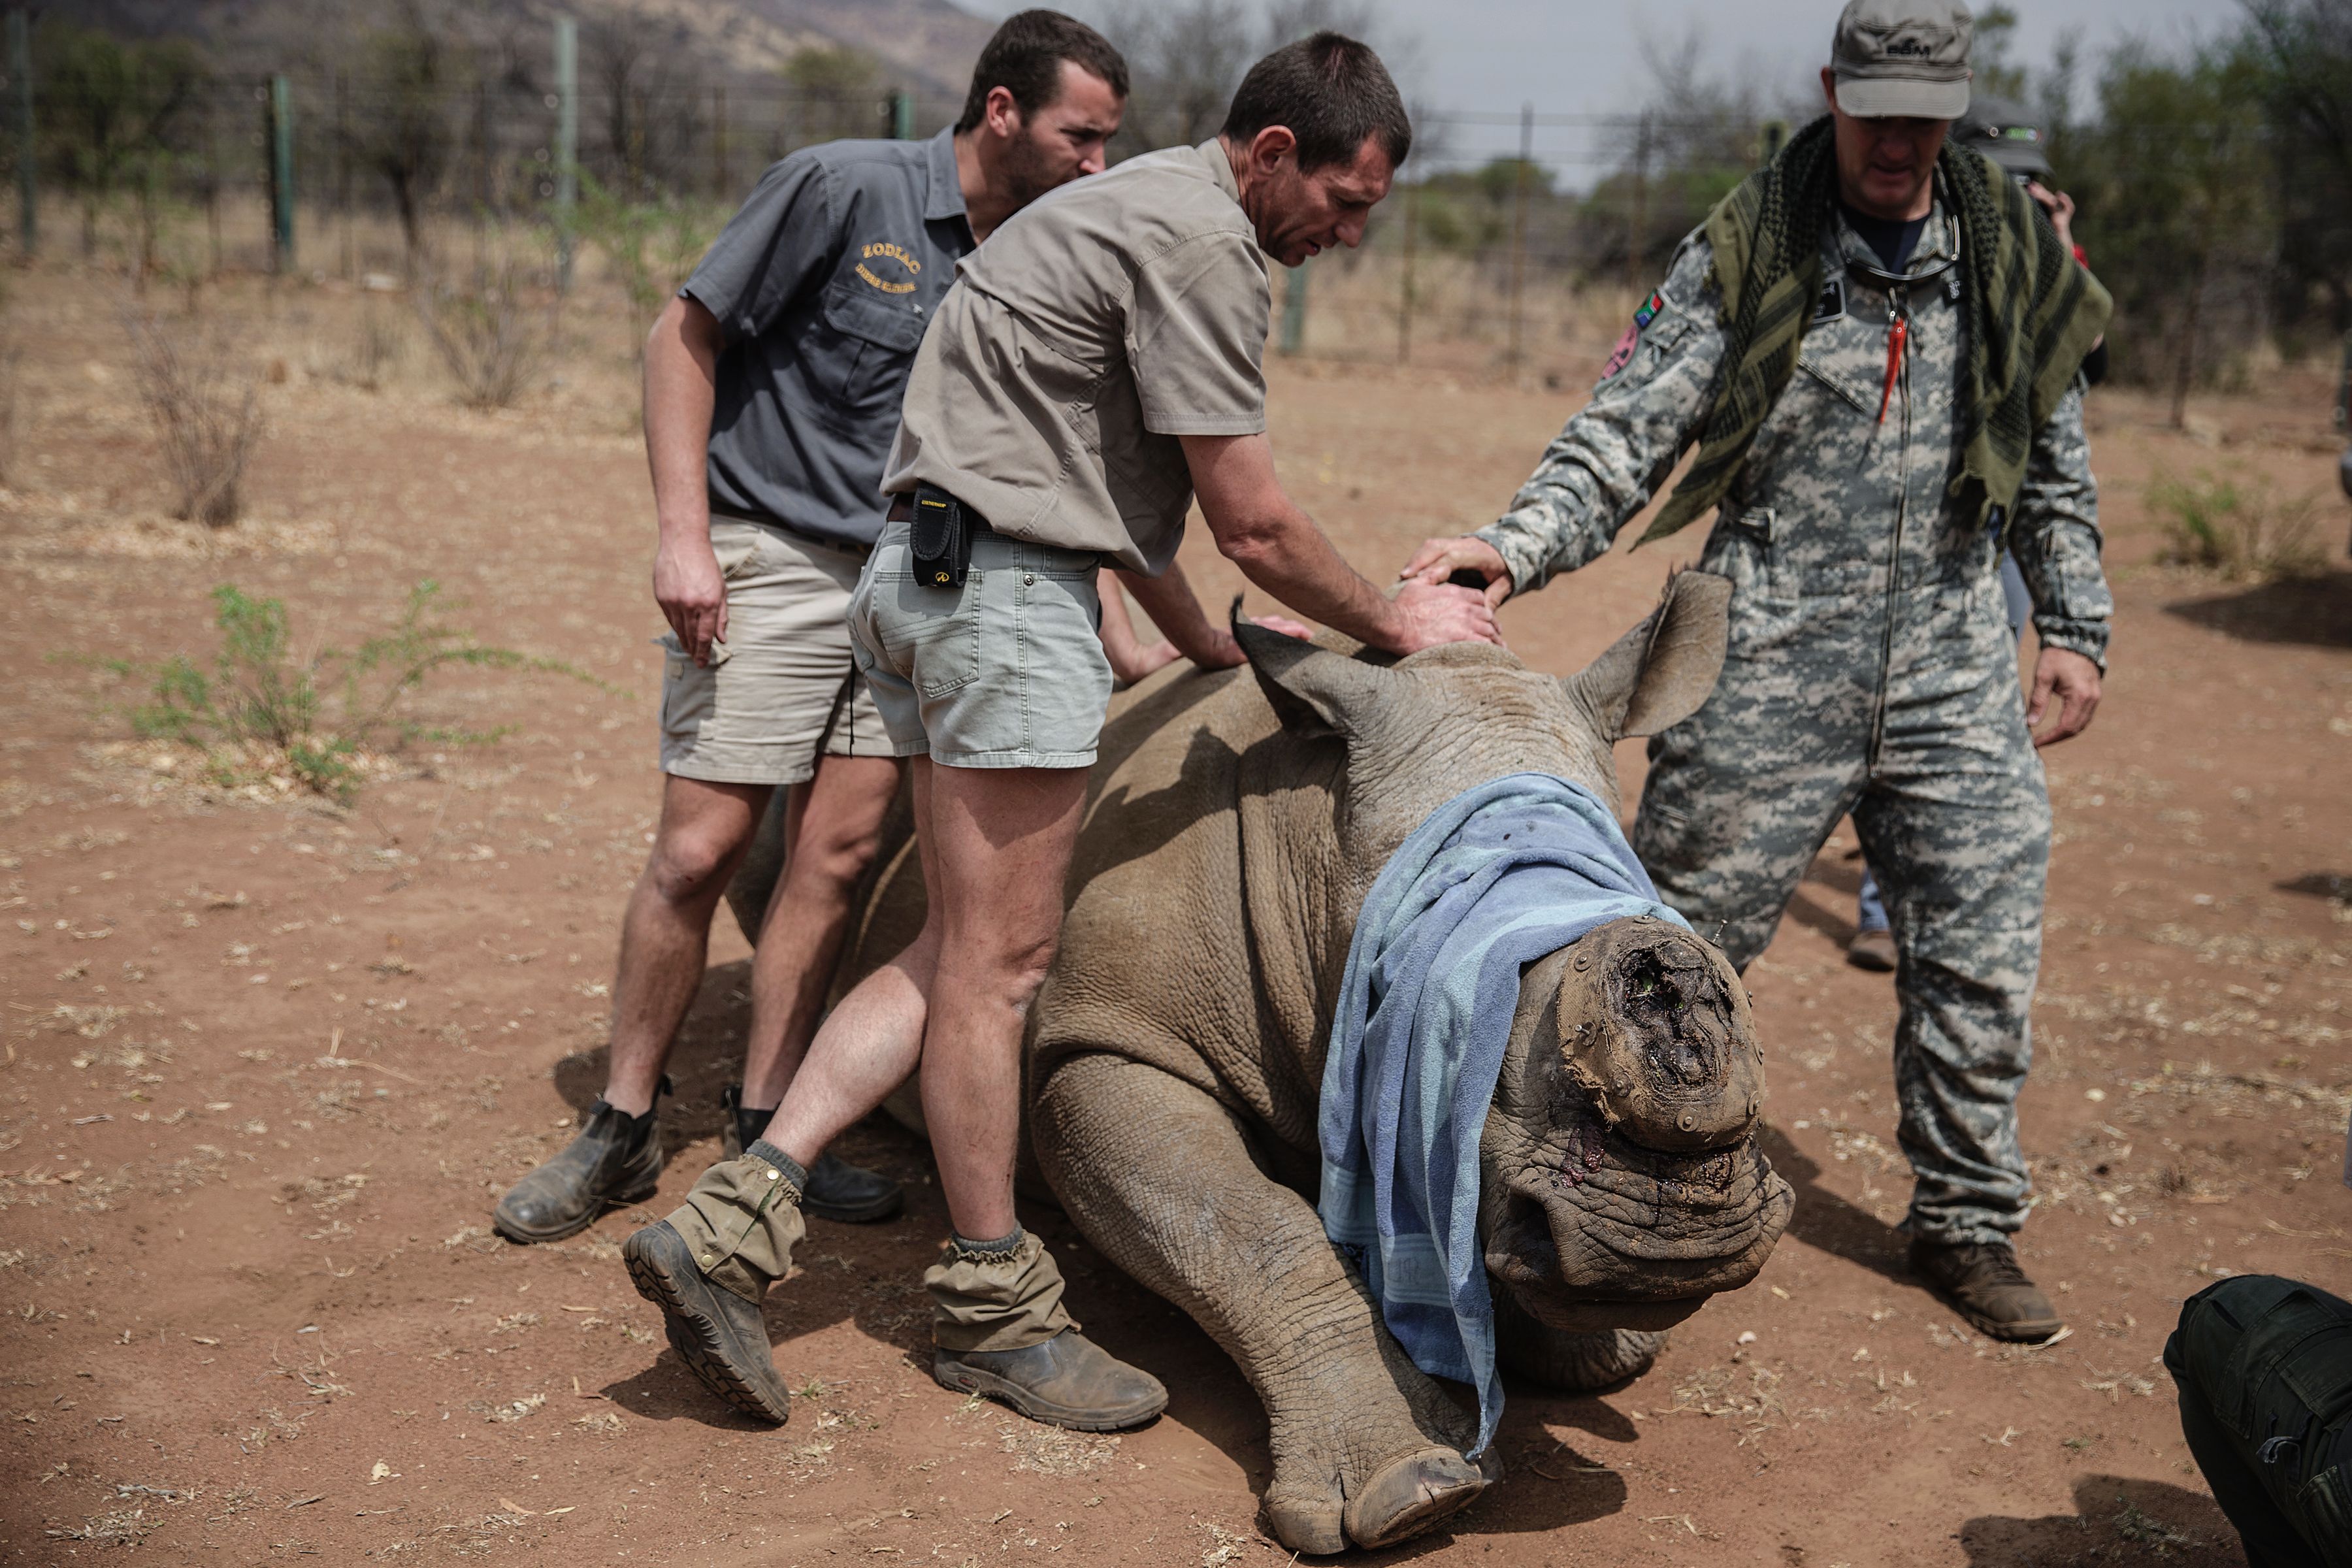 A veterinary from Saving the Survivors and RHINO911 crew attend to a previously wounded Rhino during an operation of RHINO911 Non Governamental Organization at the Pilanesberg National Park in the North West province, South Africa, on Sept. 19, 2016.